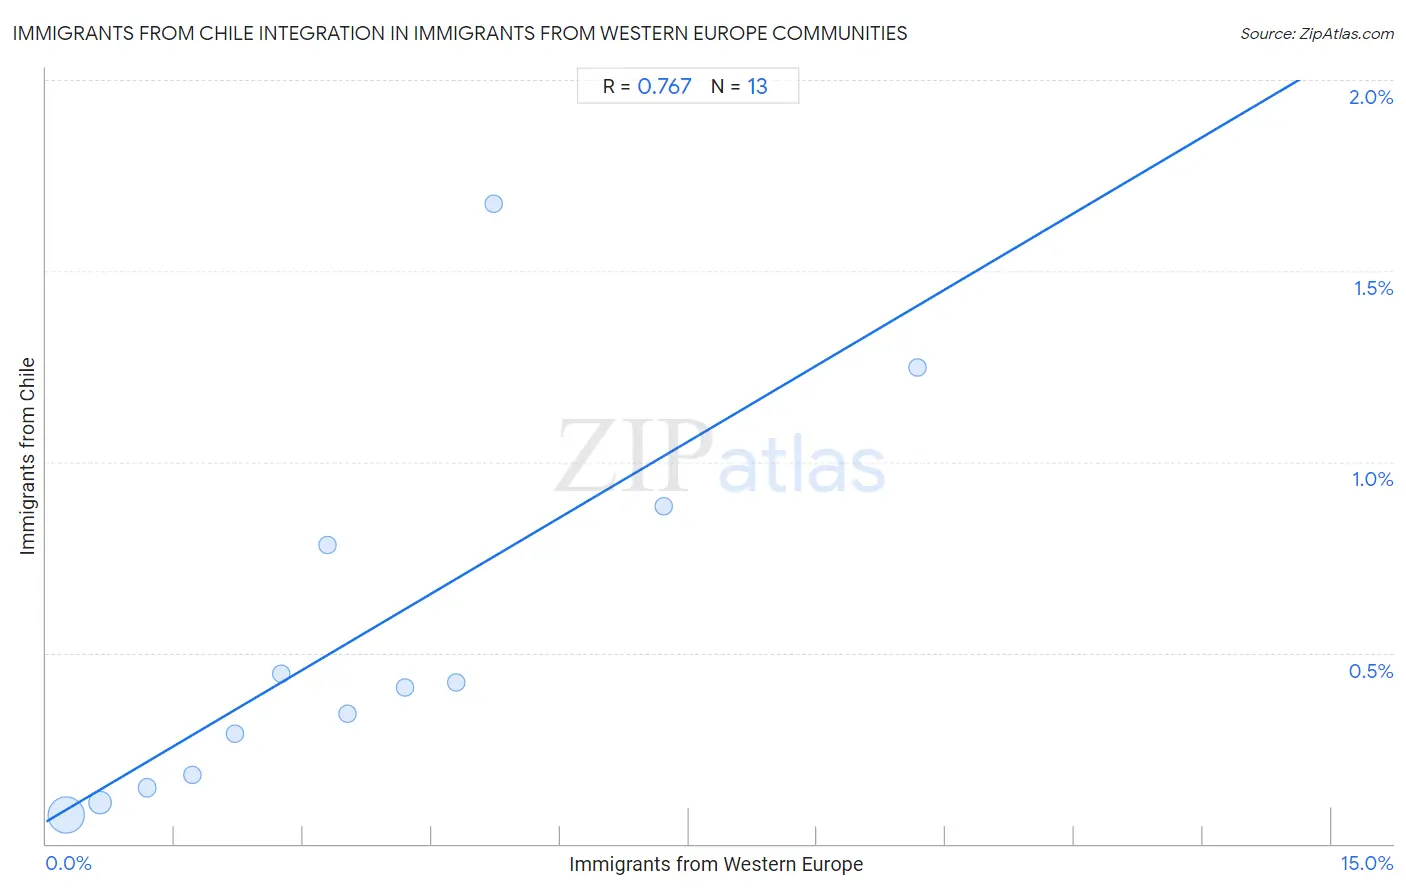 Immigrants from Western Europe Integration in Immigrants from Chile Communities